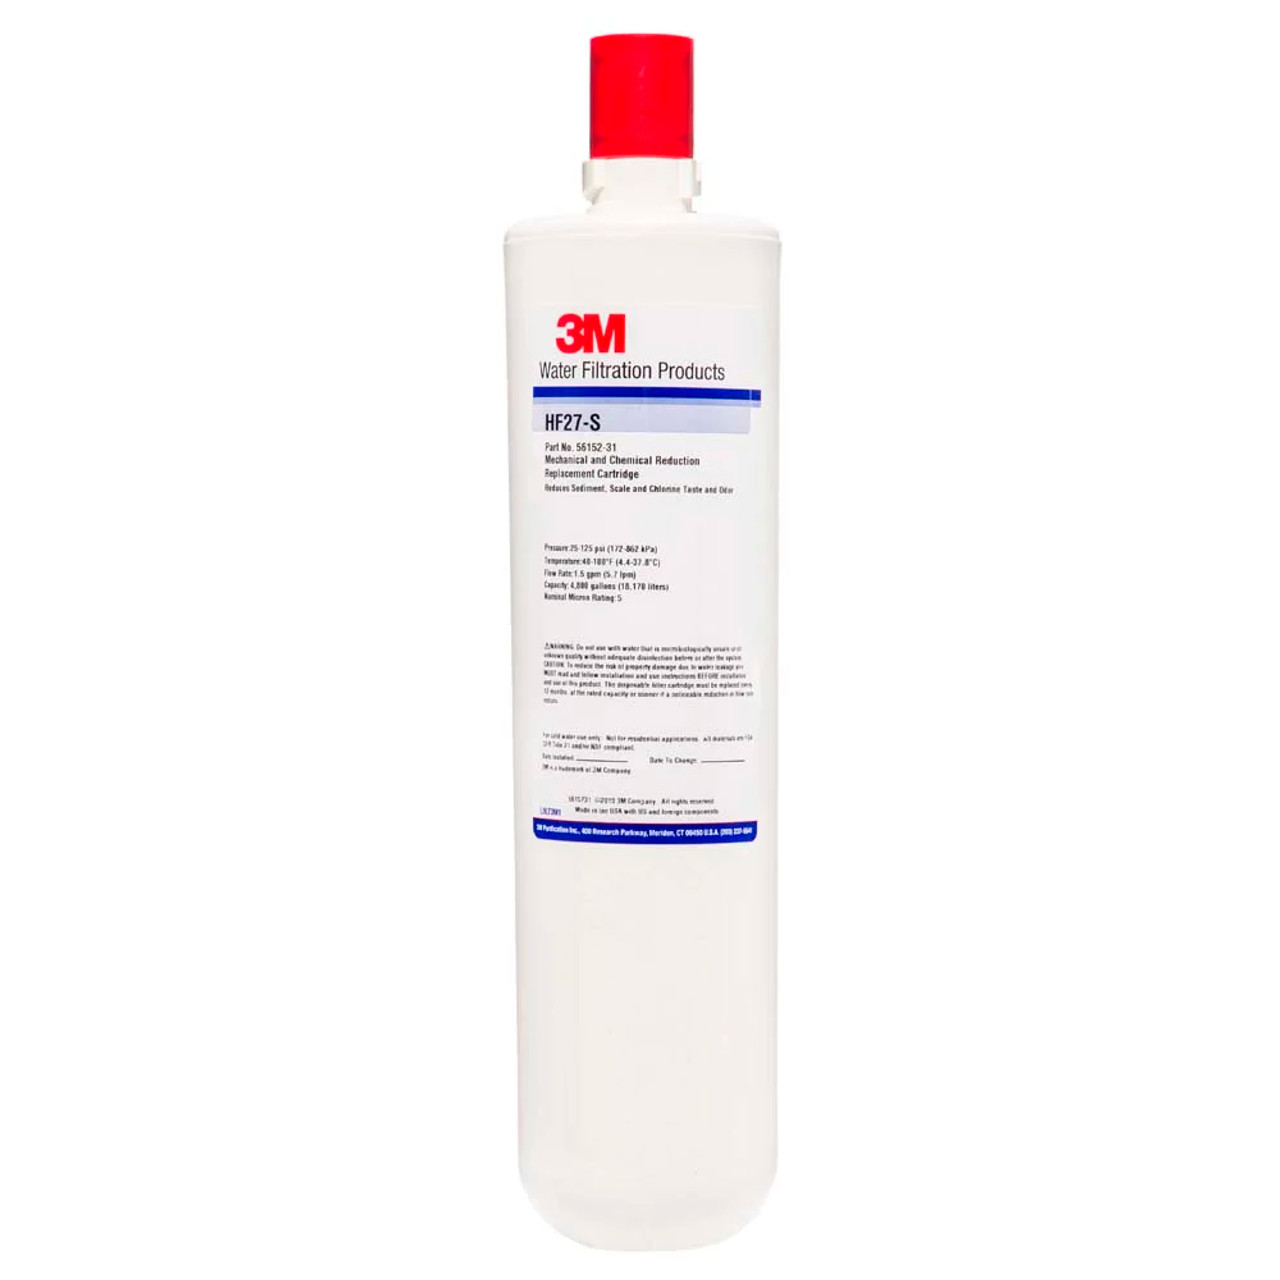 3M Cuno HF27-S HF27 S Cartridge For 62130 - Reduces Sediment, Chlorine, Odor - Chicken Pieces